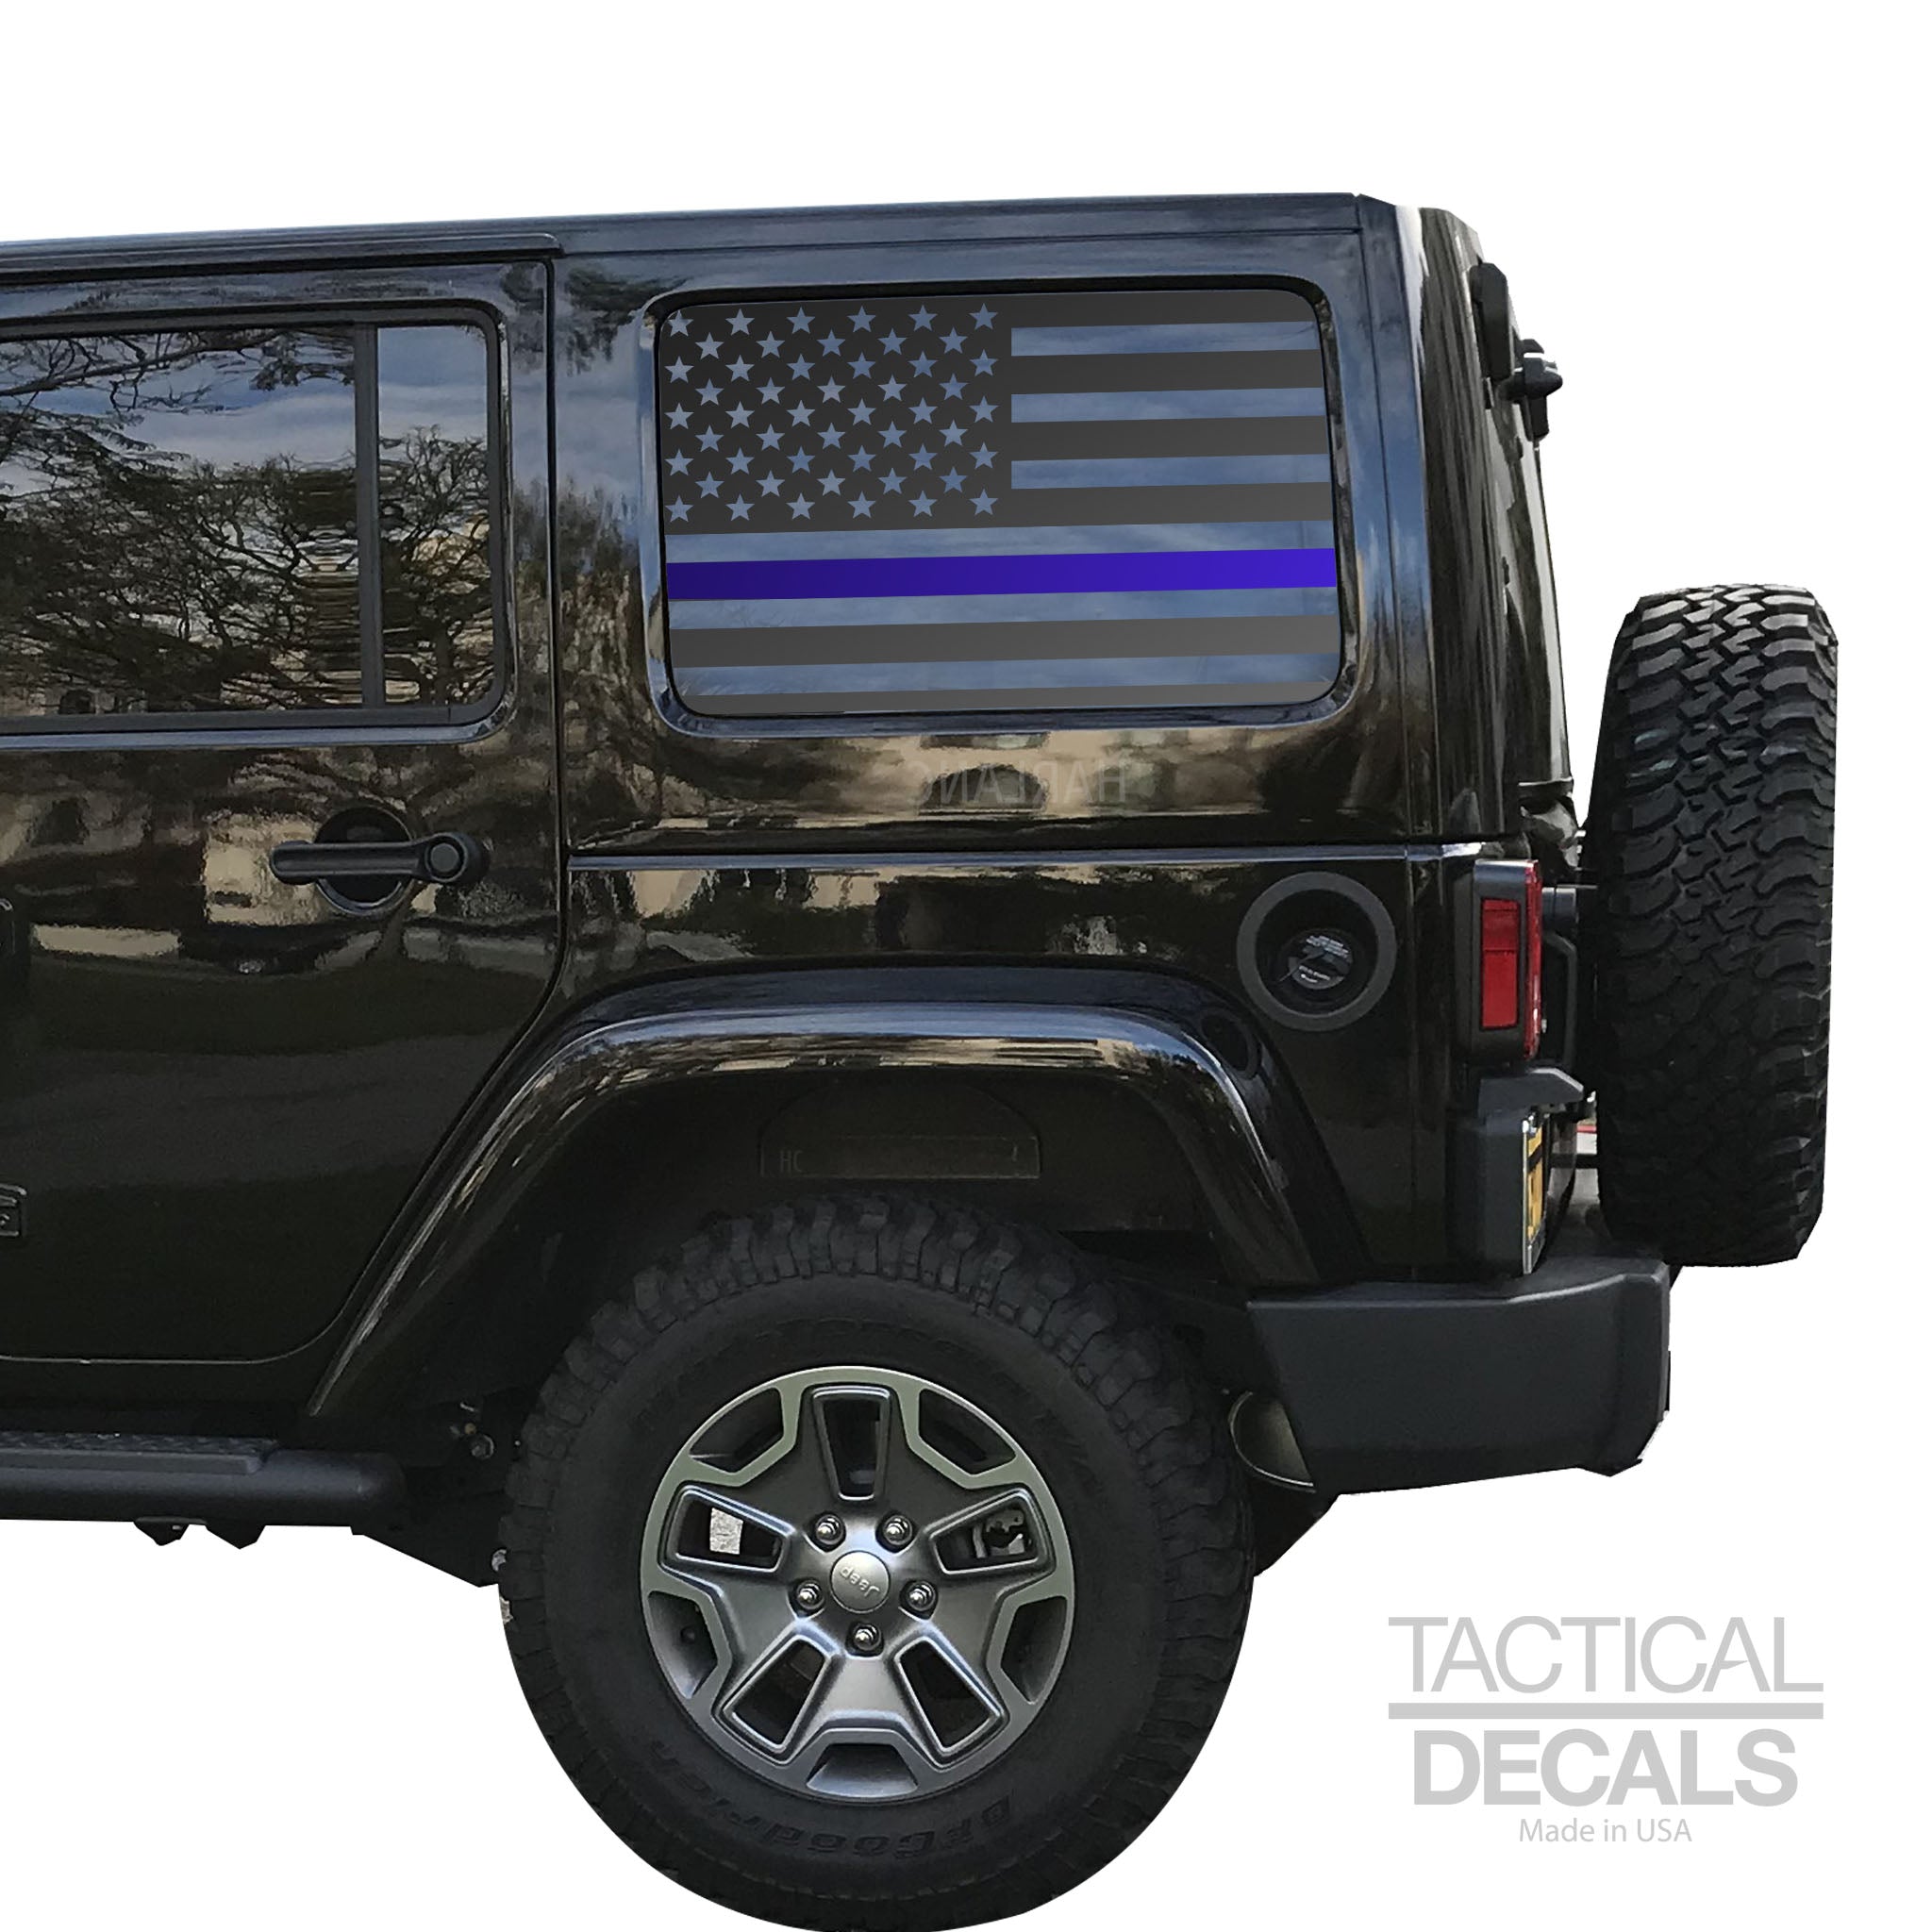 USA Flag w/ Thin Blue Line Decal for 2007 - 2020 Jeep Wrangler 4 Door –  Tactical Decals